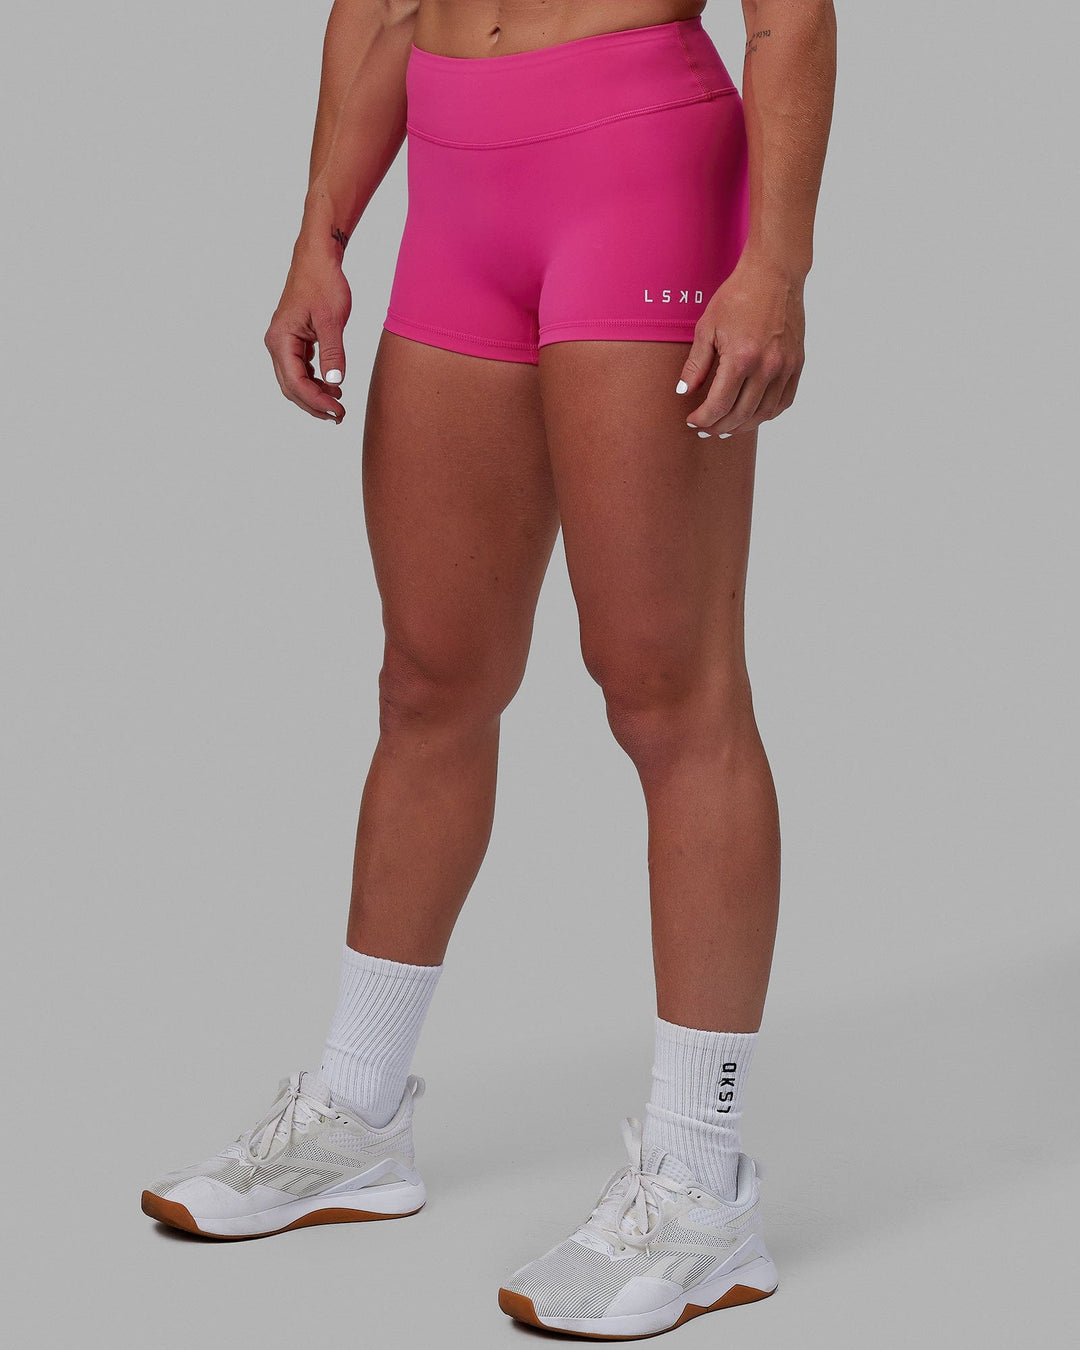 Woman wearing RXD Micro Short Tights - Ultra Pink